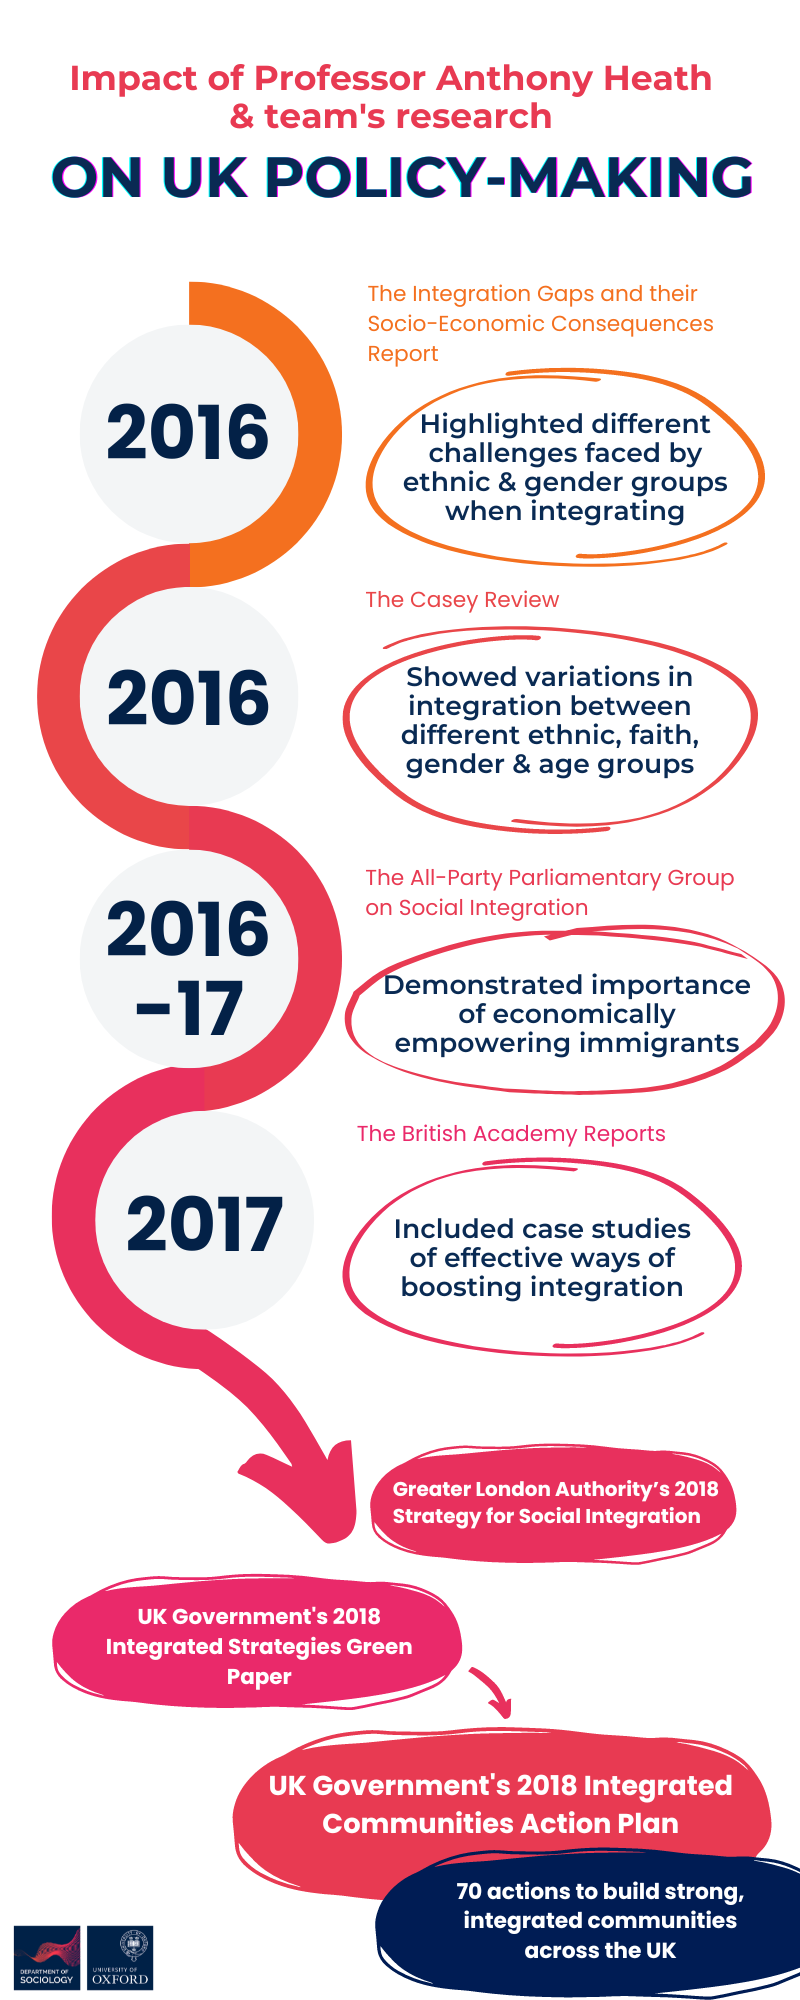 Infographic showing the impacts of Professor Anthony Heath's research